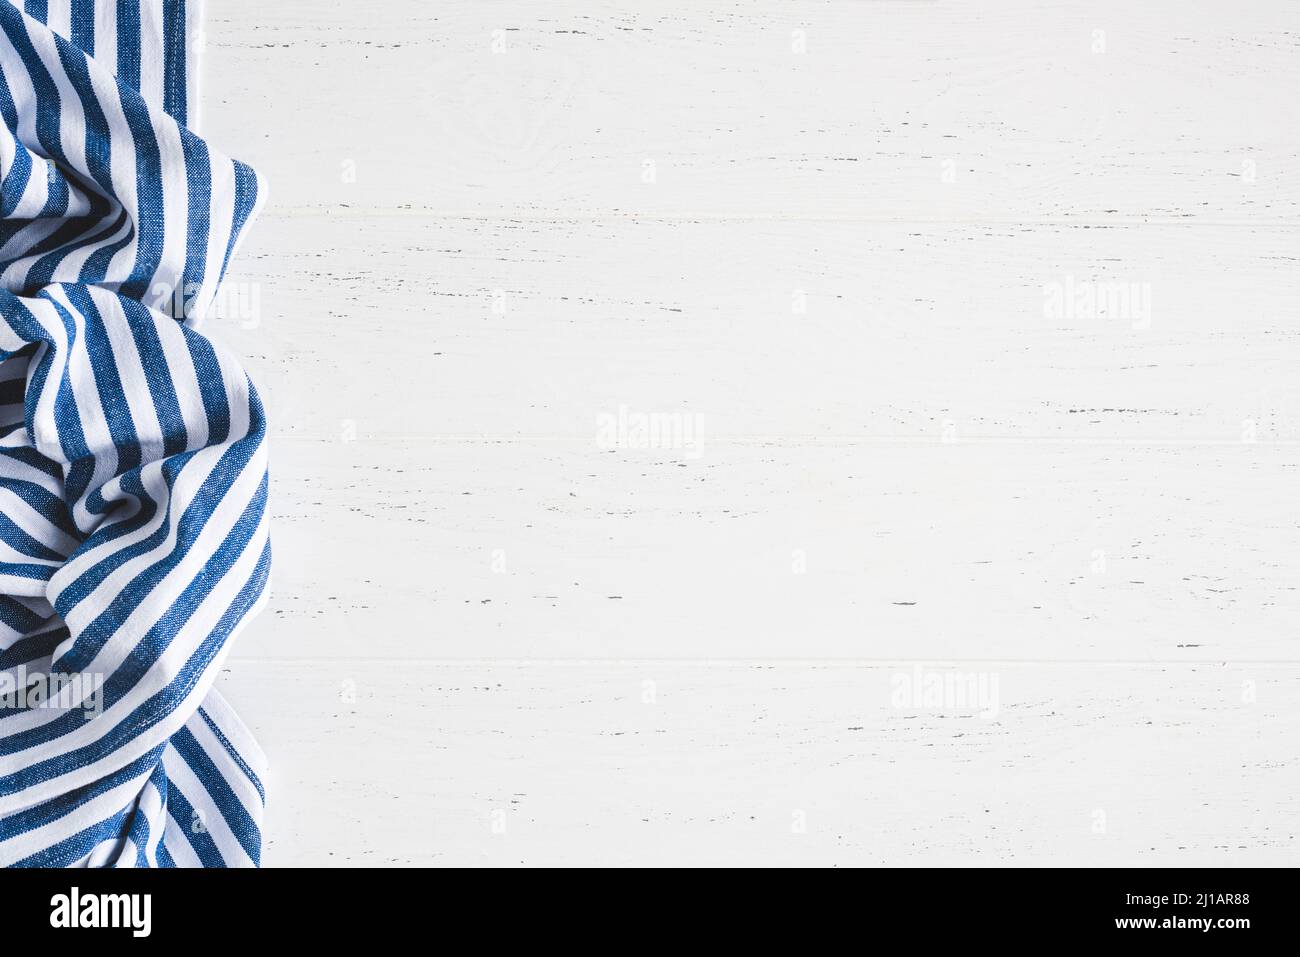 White wooden background with blue striped kitchen textile. Food background for web banner, food recipes, advertising and design elements Stock Photo